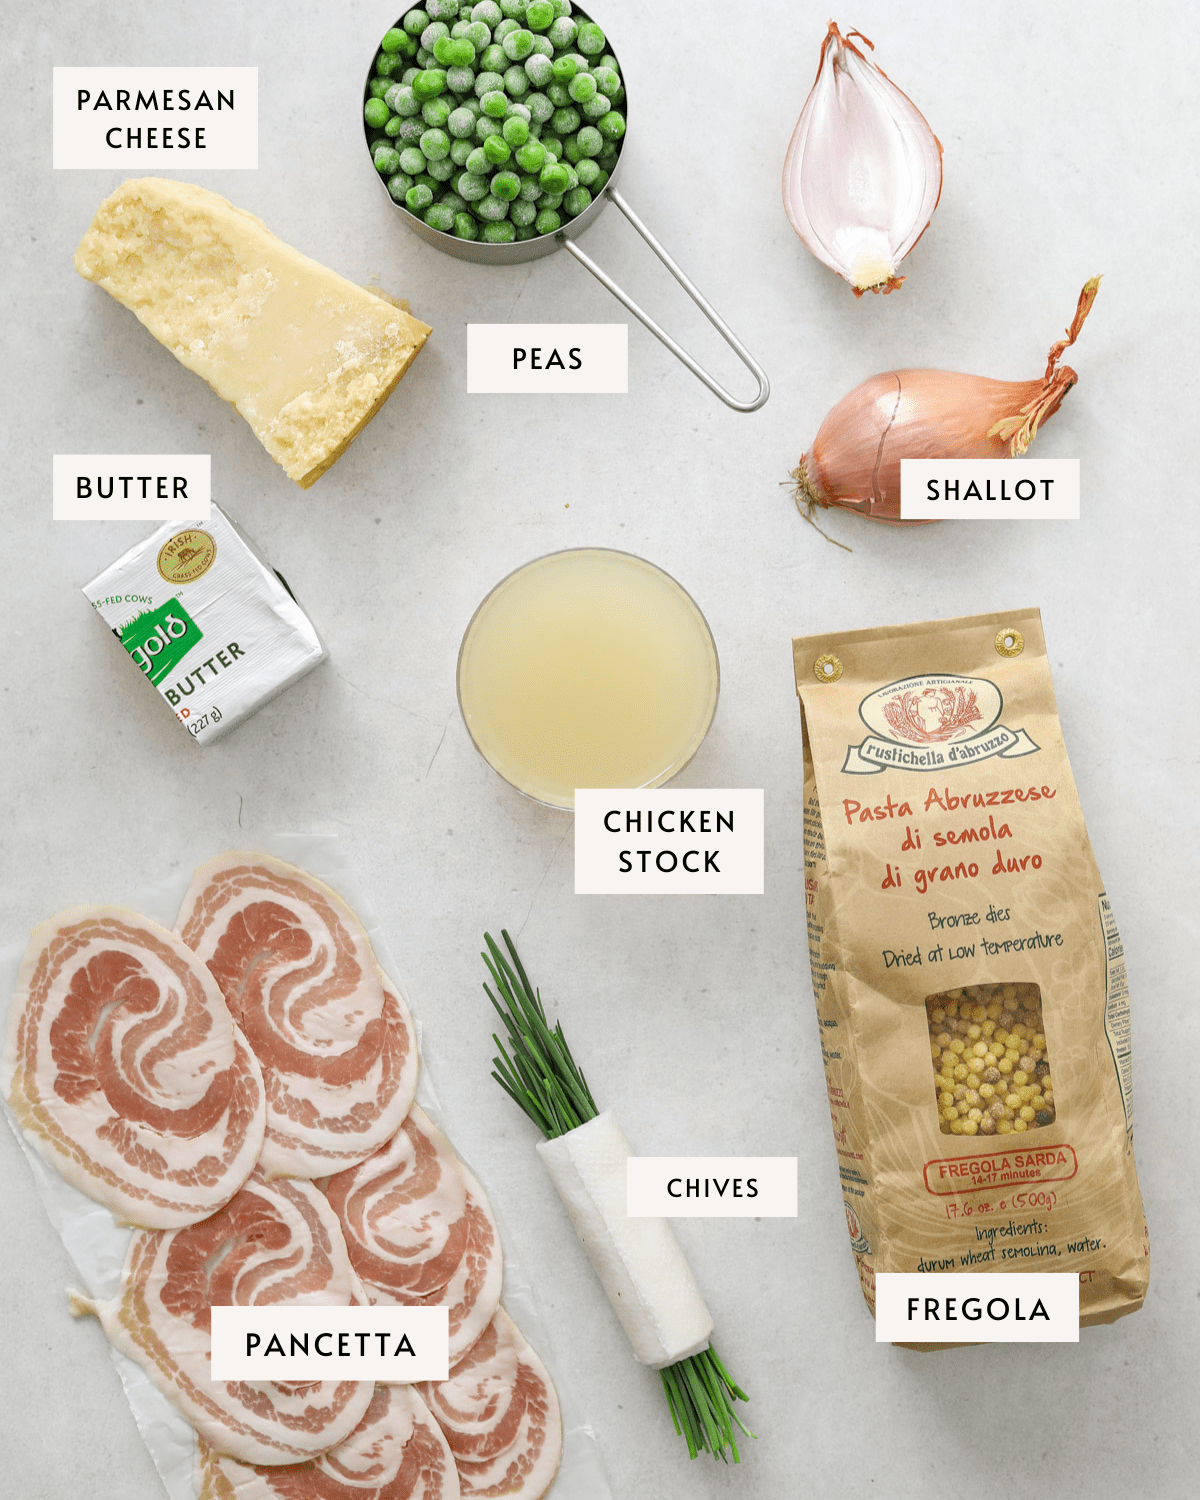 a hunk of parmesan cheese, raw sliced pancetta, a bundle of chives, a bag of Fregola, a shallot sliced in half, a small glass bowl of chicken stock